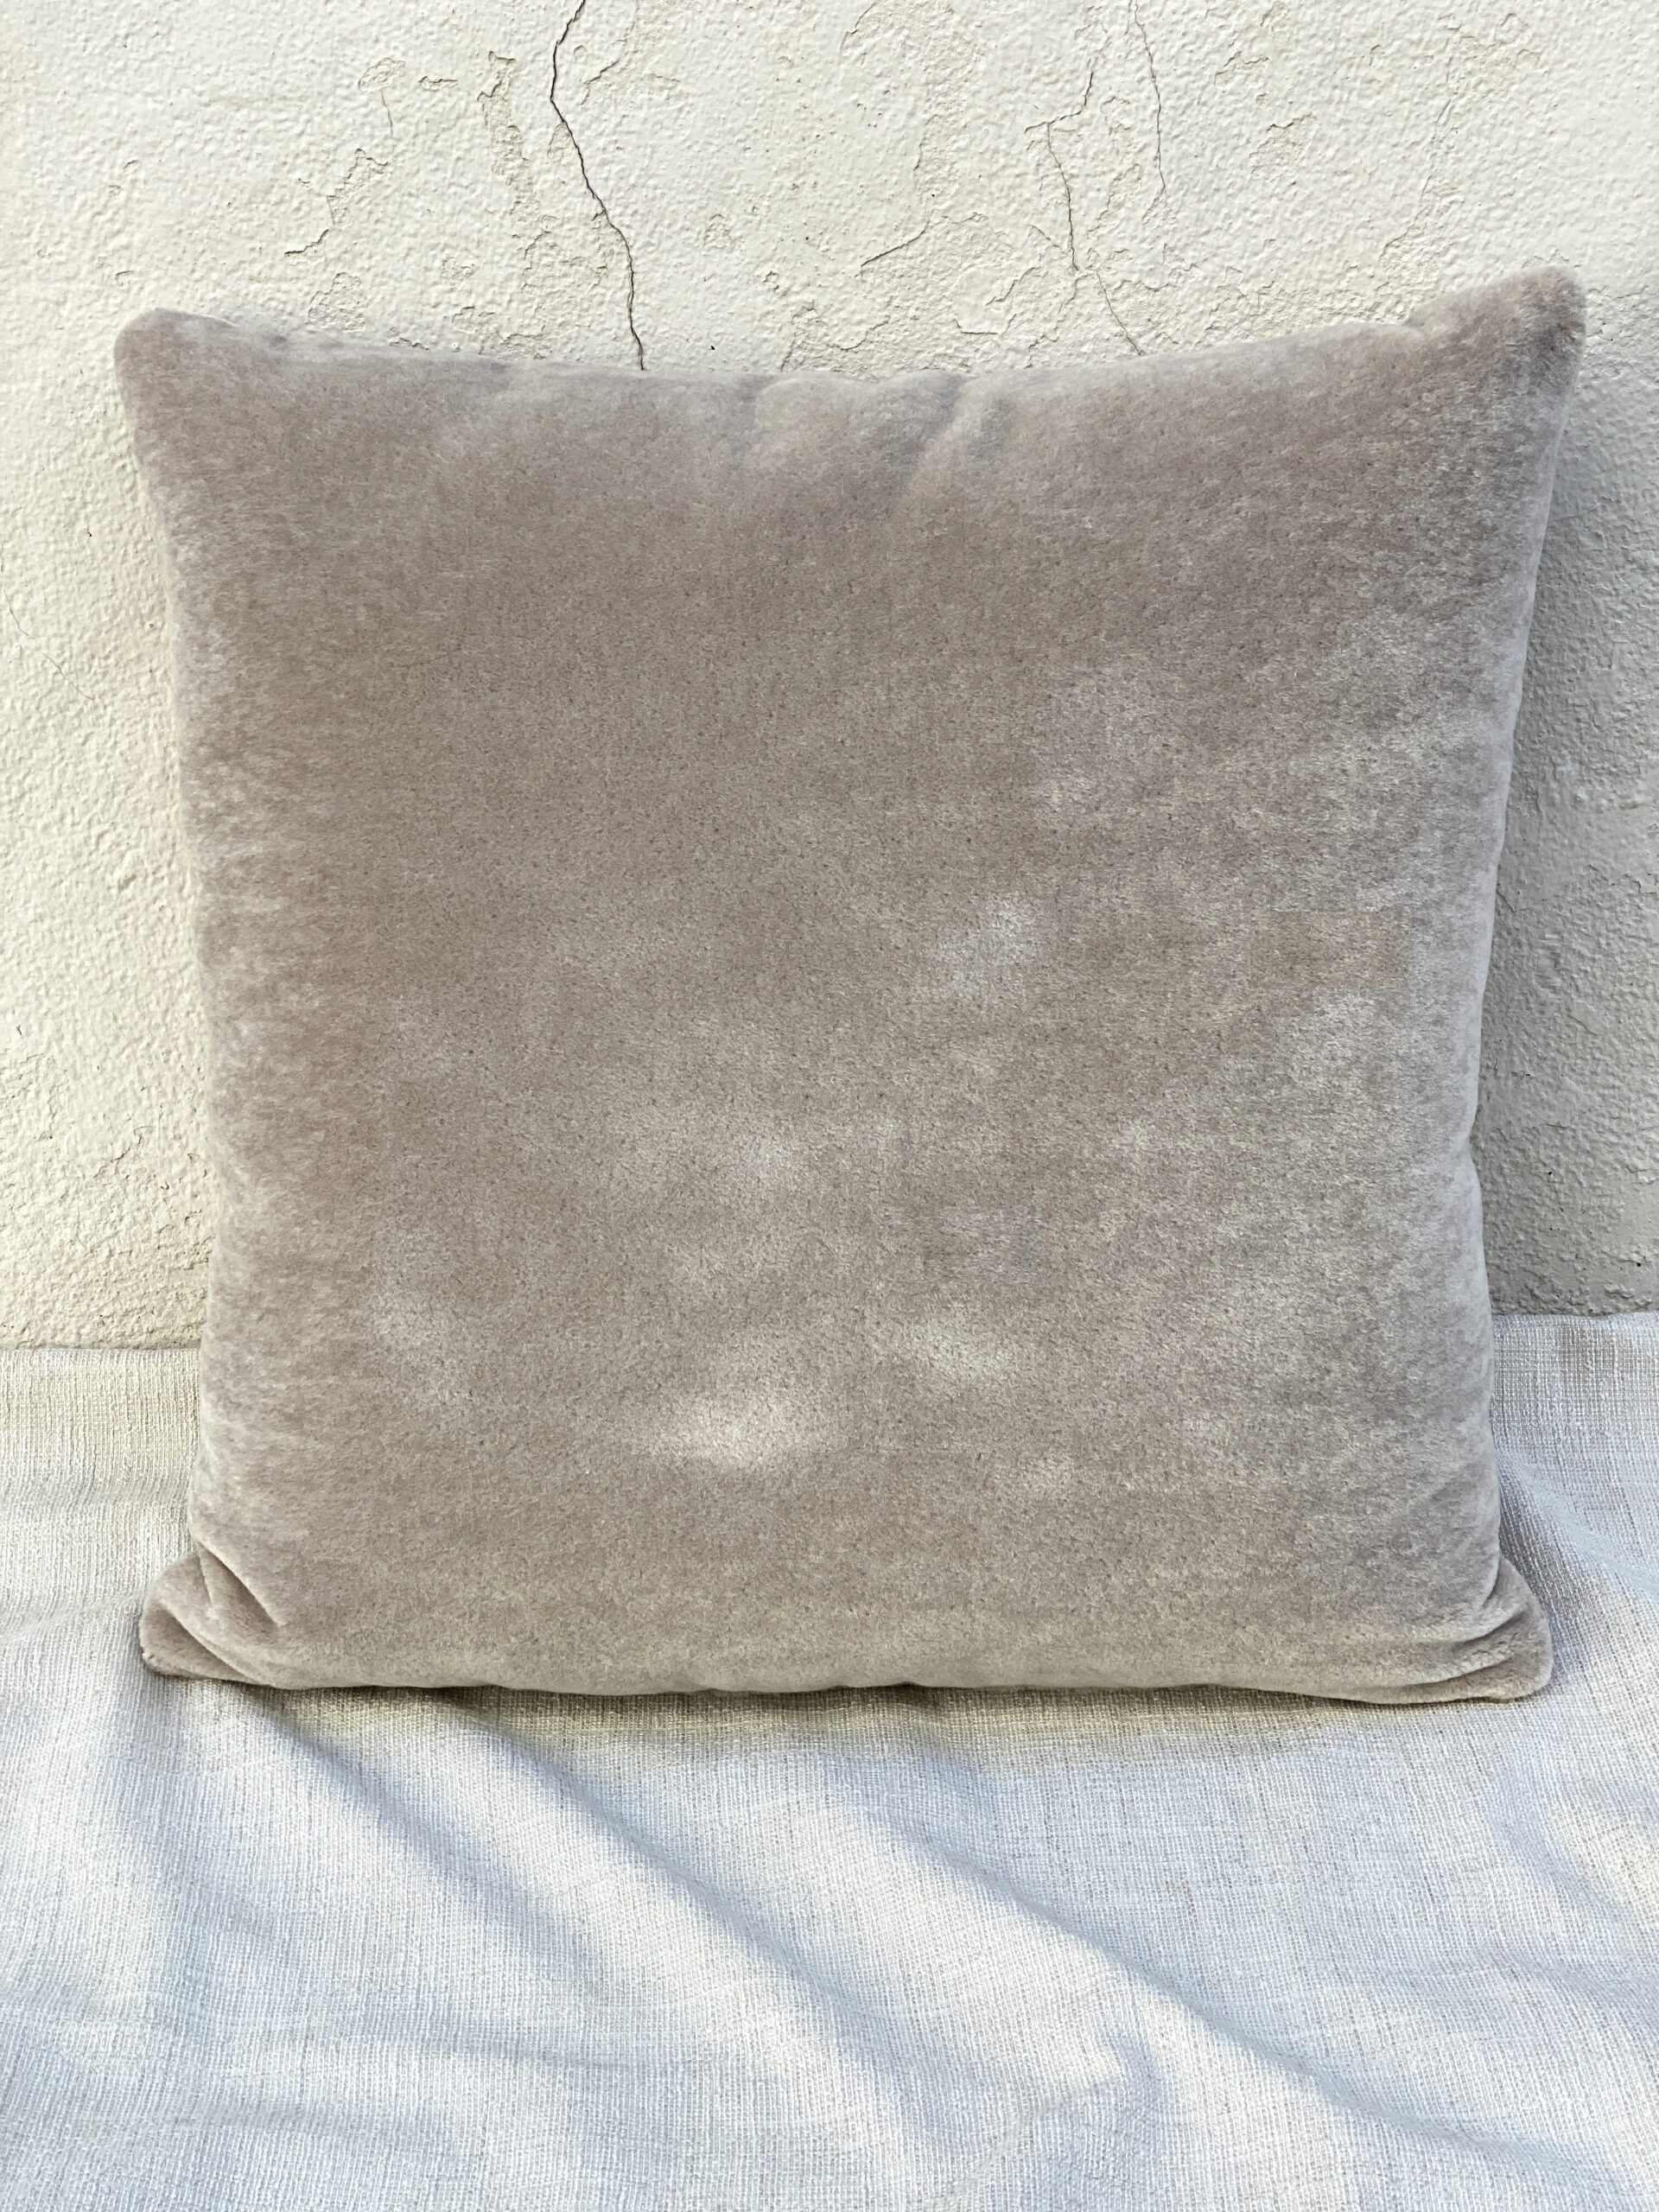 Holly Hunt Great Plains Fuzzy Wuzzy Pillows